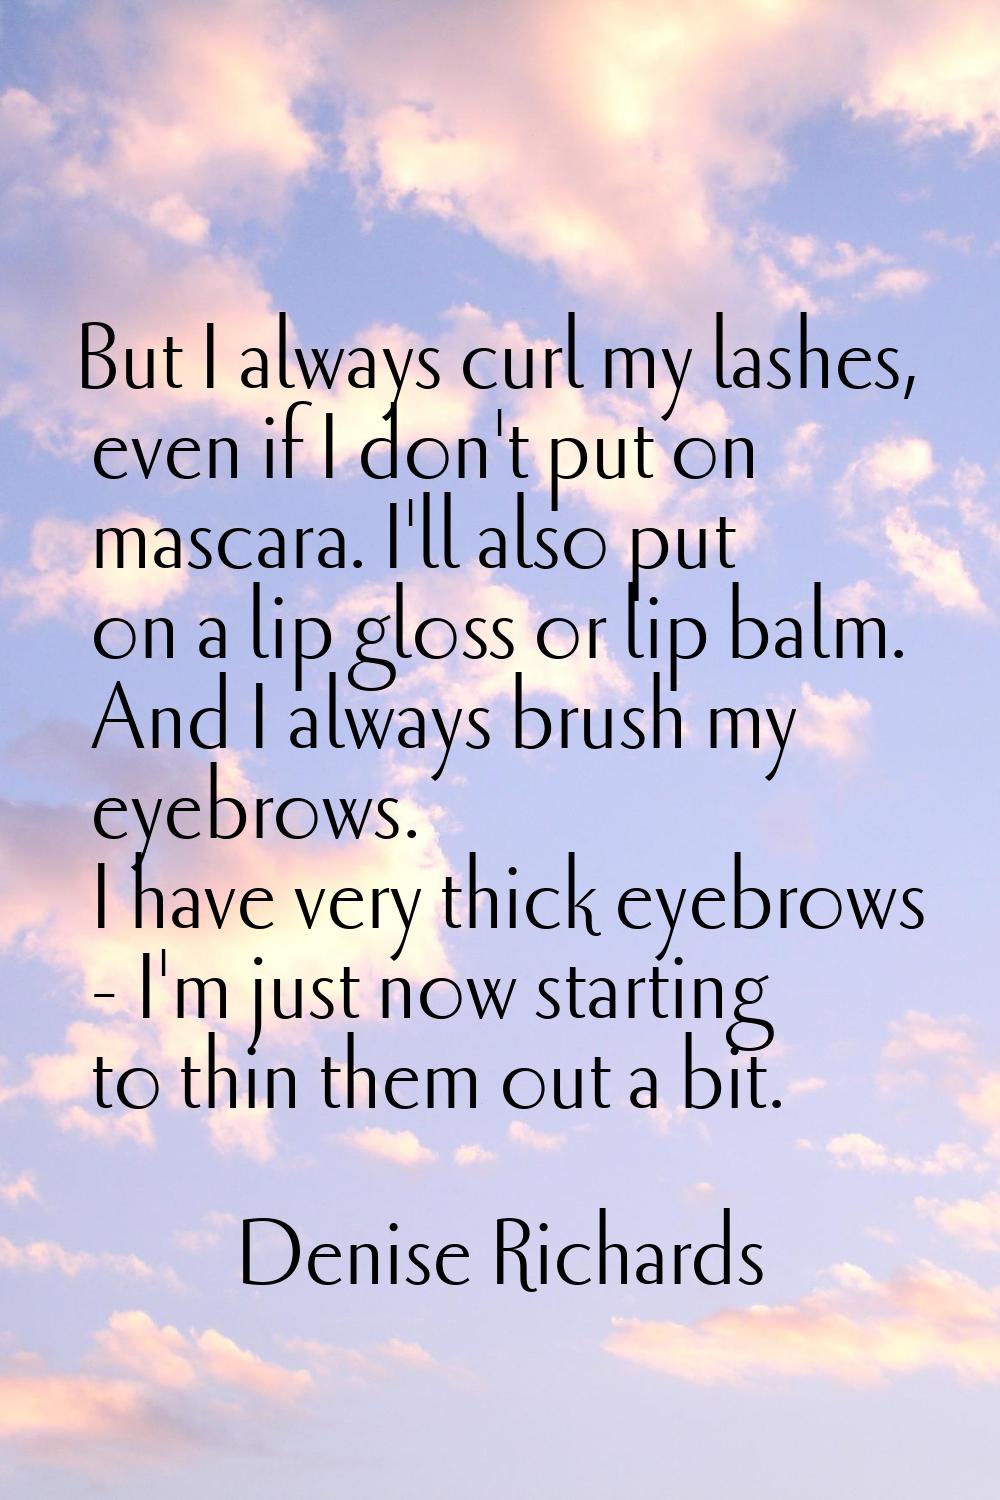 But I always curl my lashes, even if I don't put on mascara. I'll also put on a lip gloss or lip ba